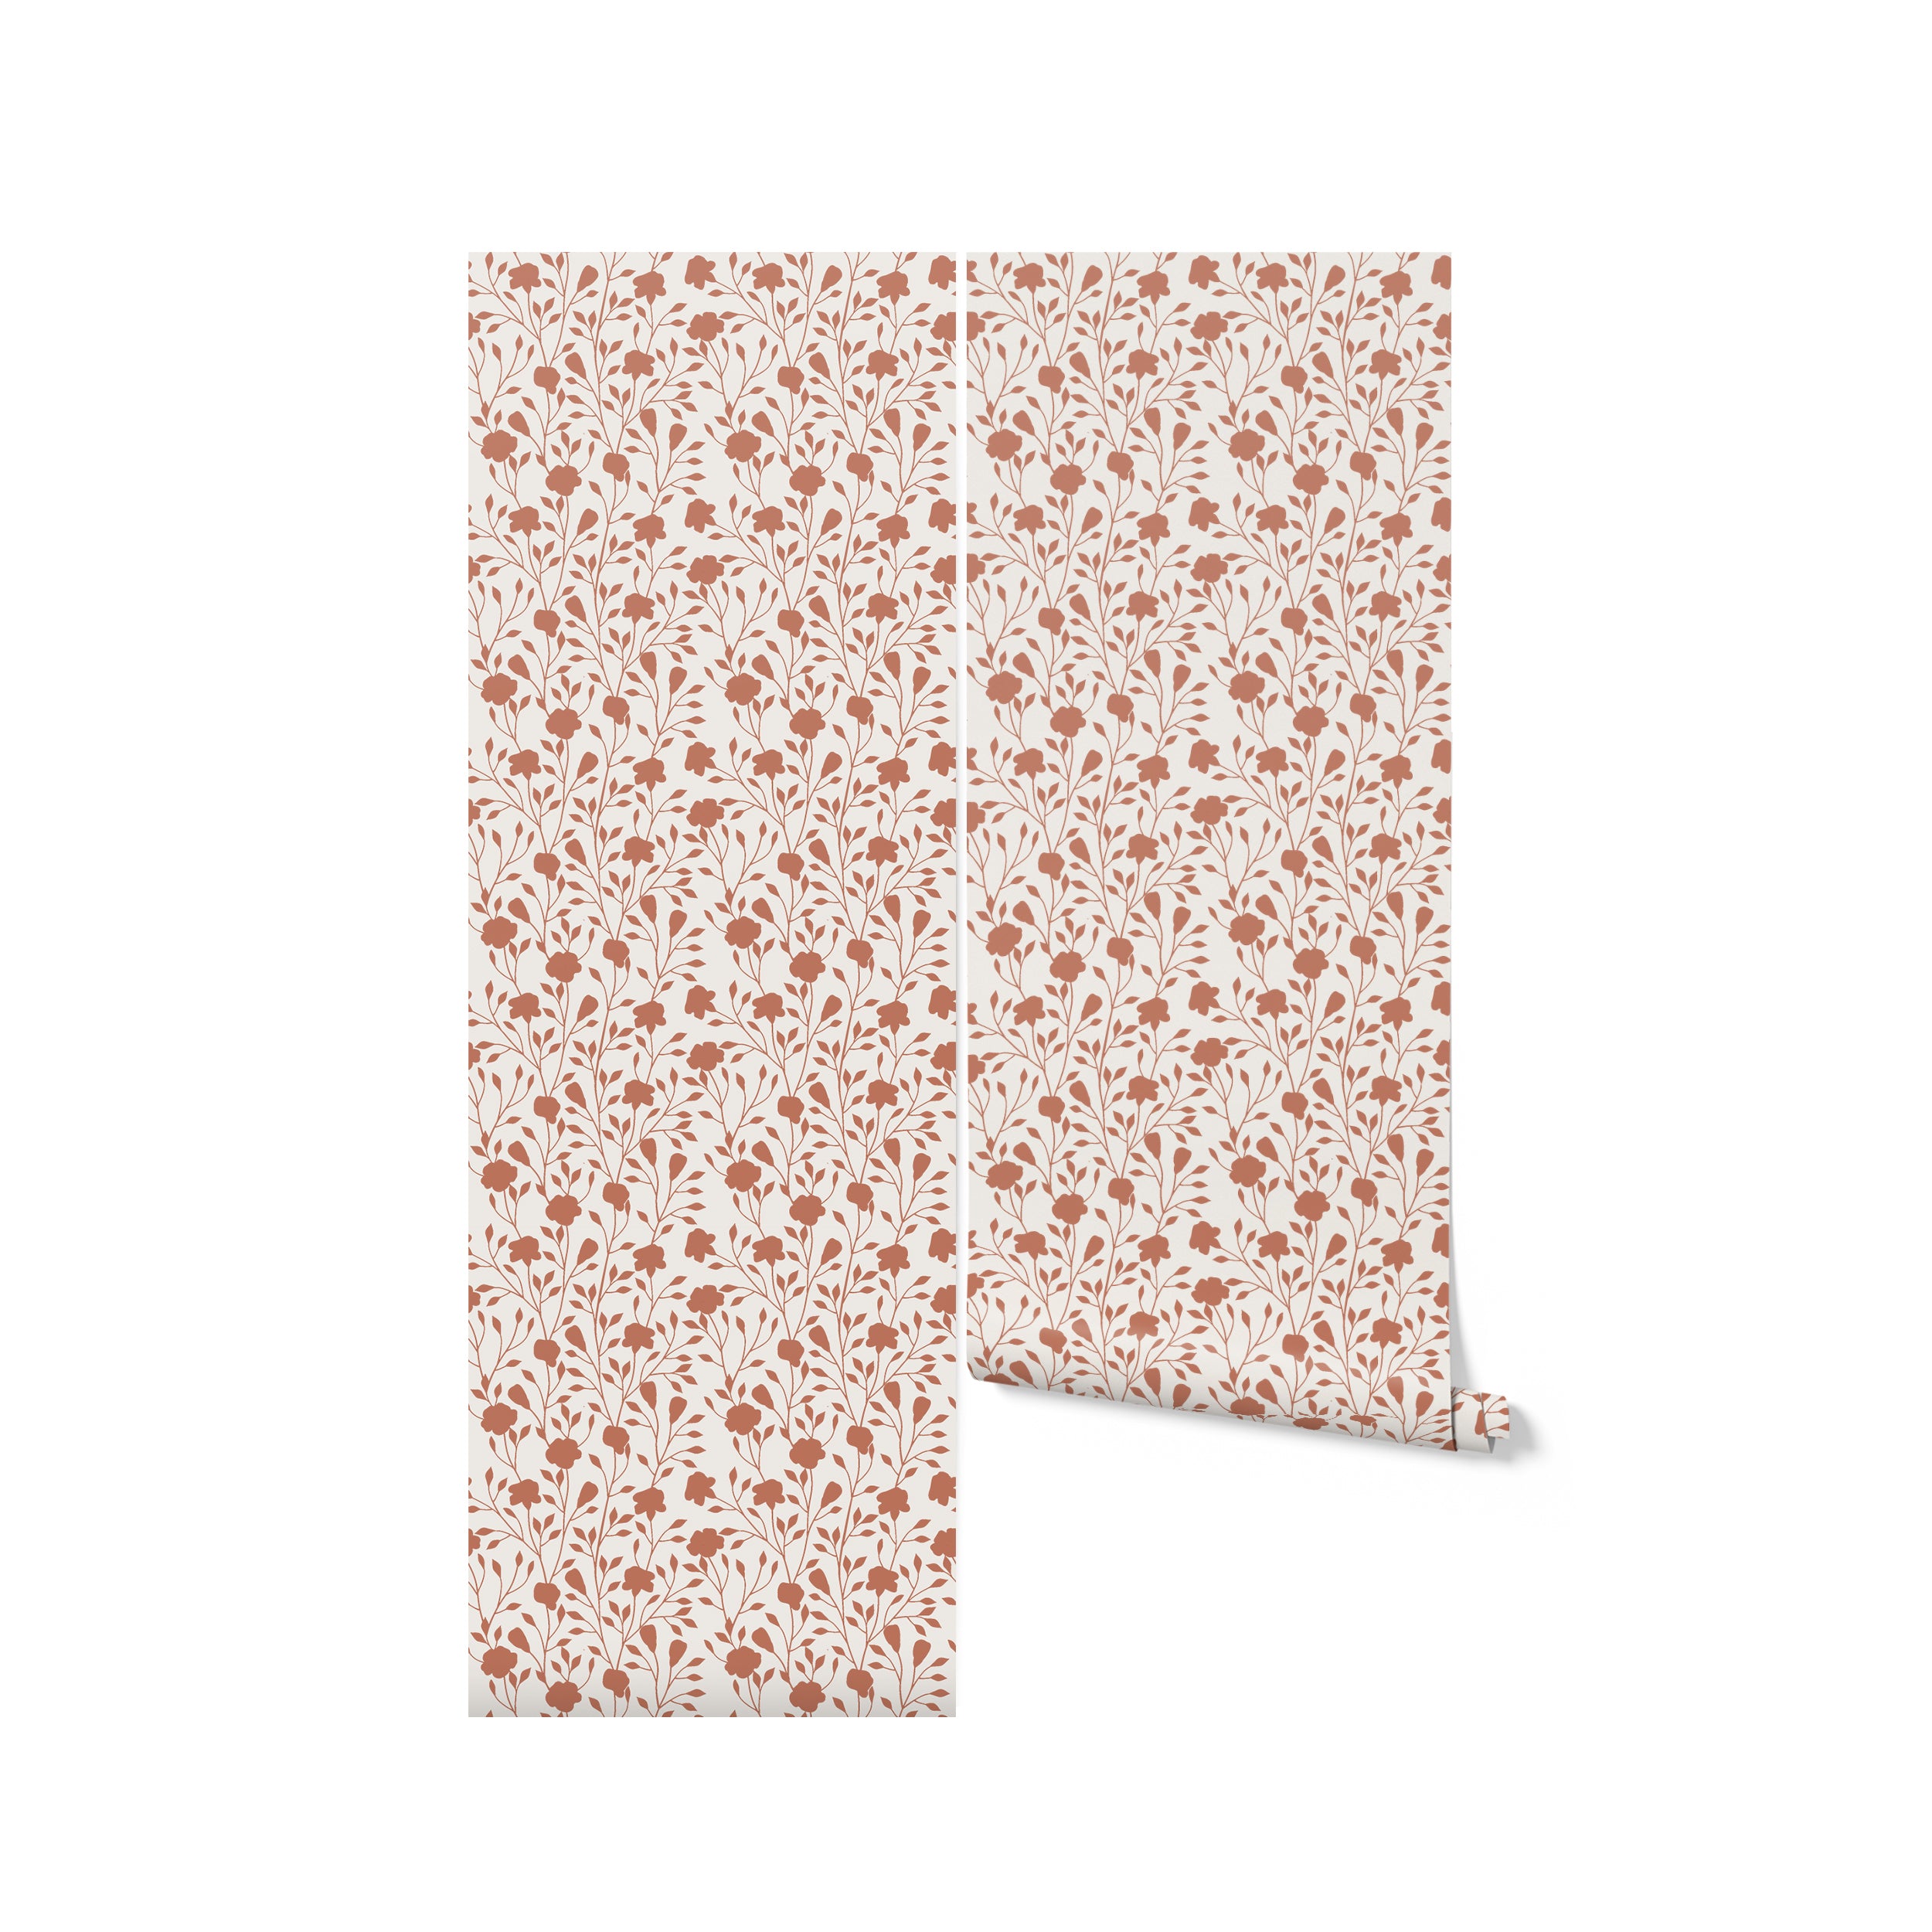 A roll of Garden Gaze Wallpaper displayed vertically, showing the elegant terracotta floral pattern on an ecru background. This presentation emphasizes the wallpaper’s potential to transform home spaces with its graceful and organic design.